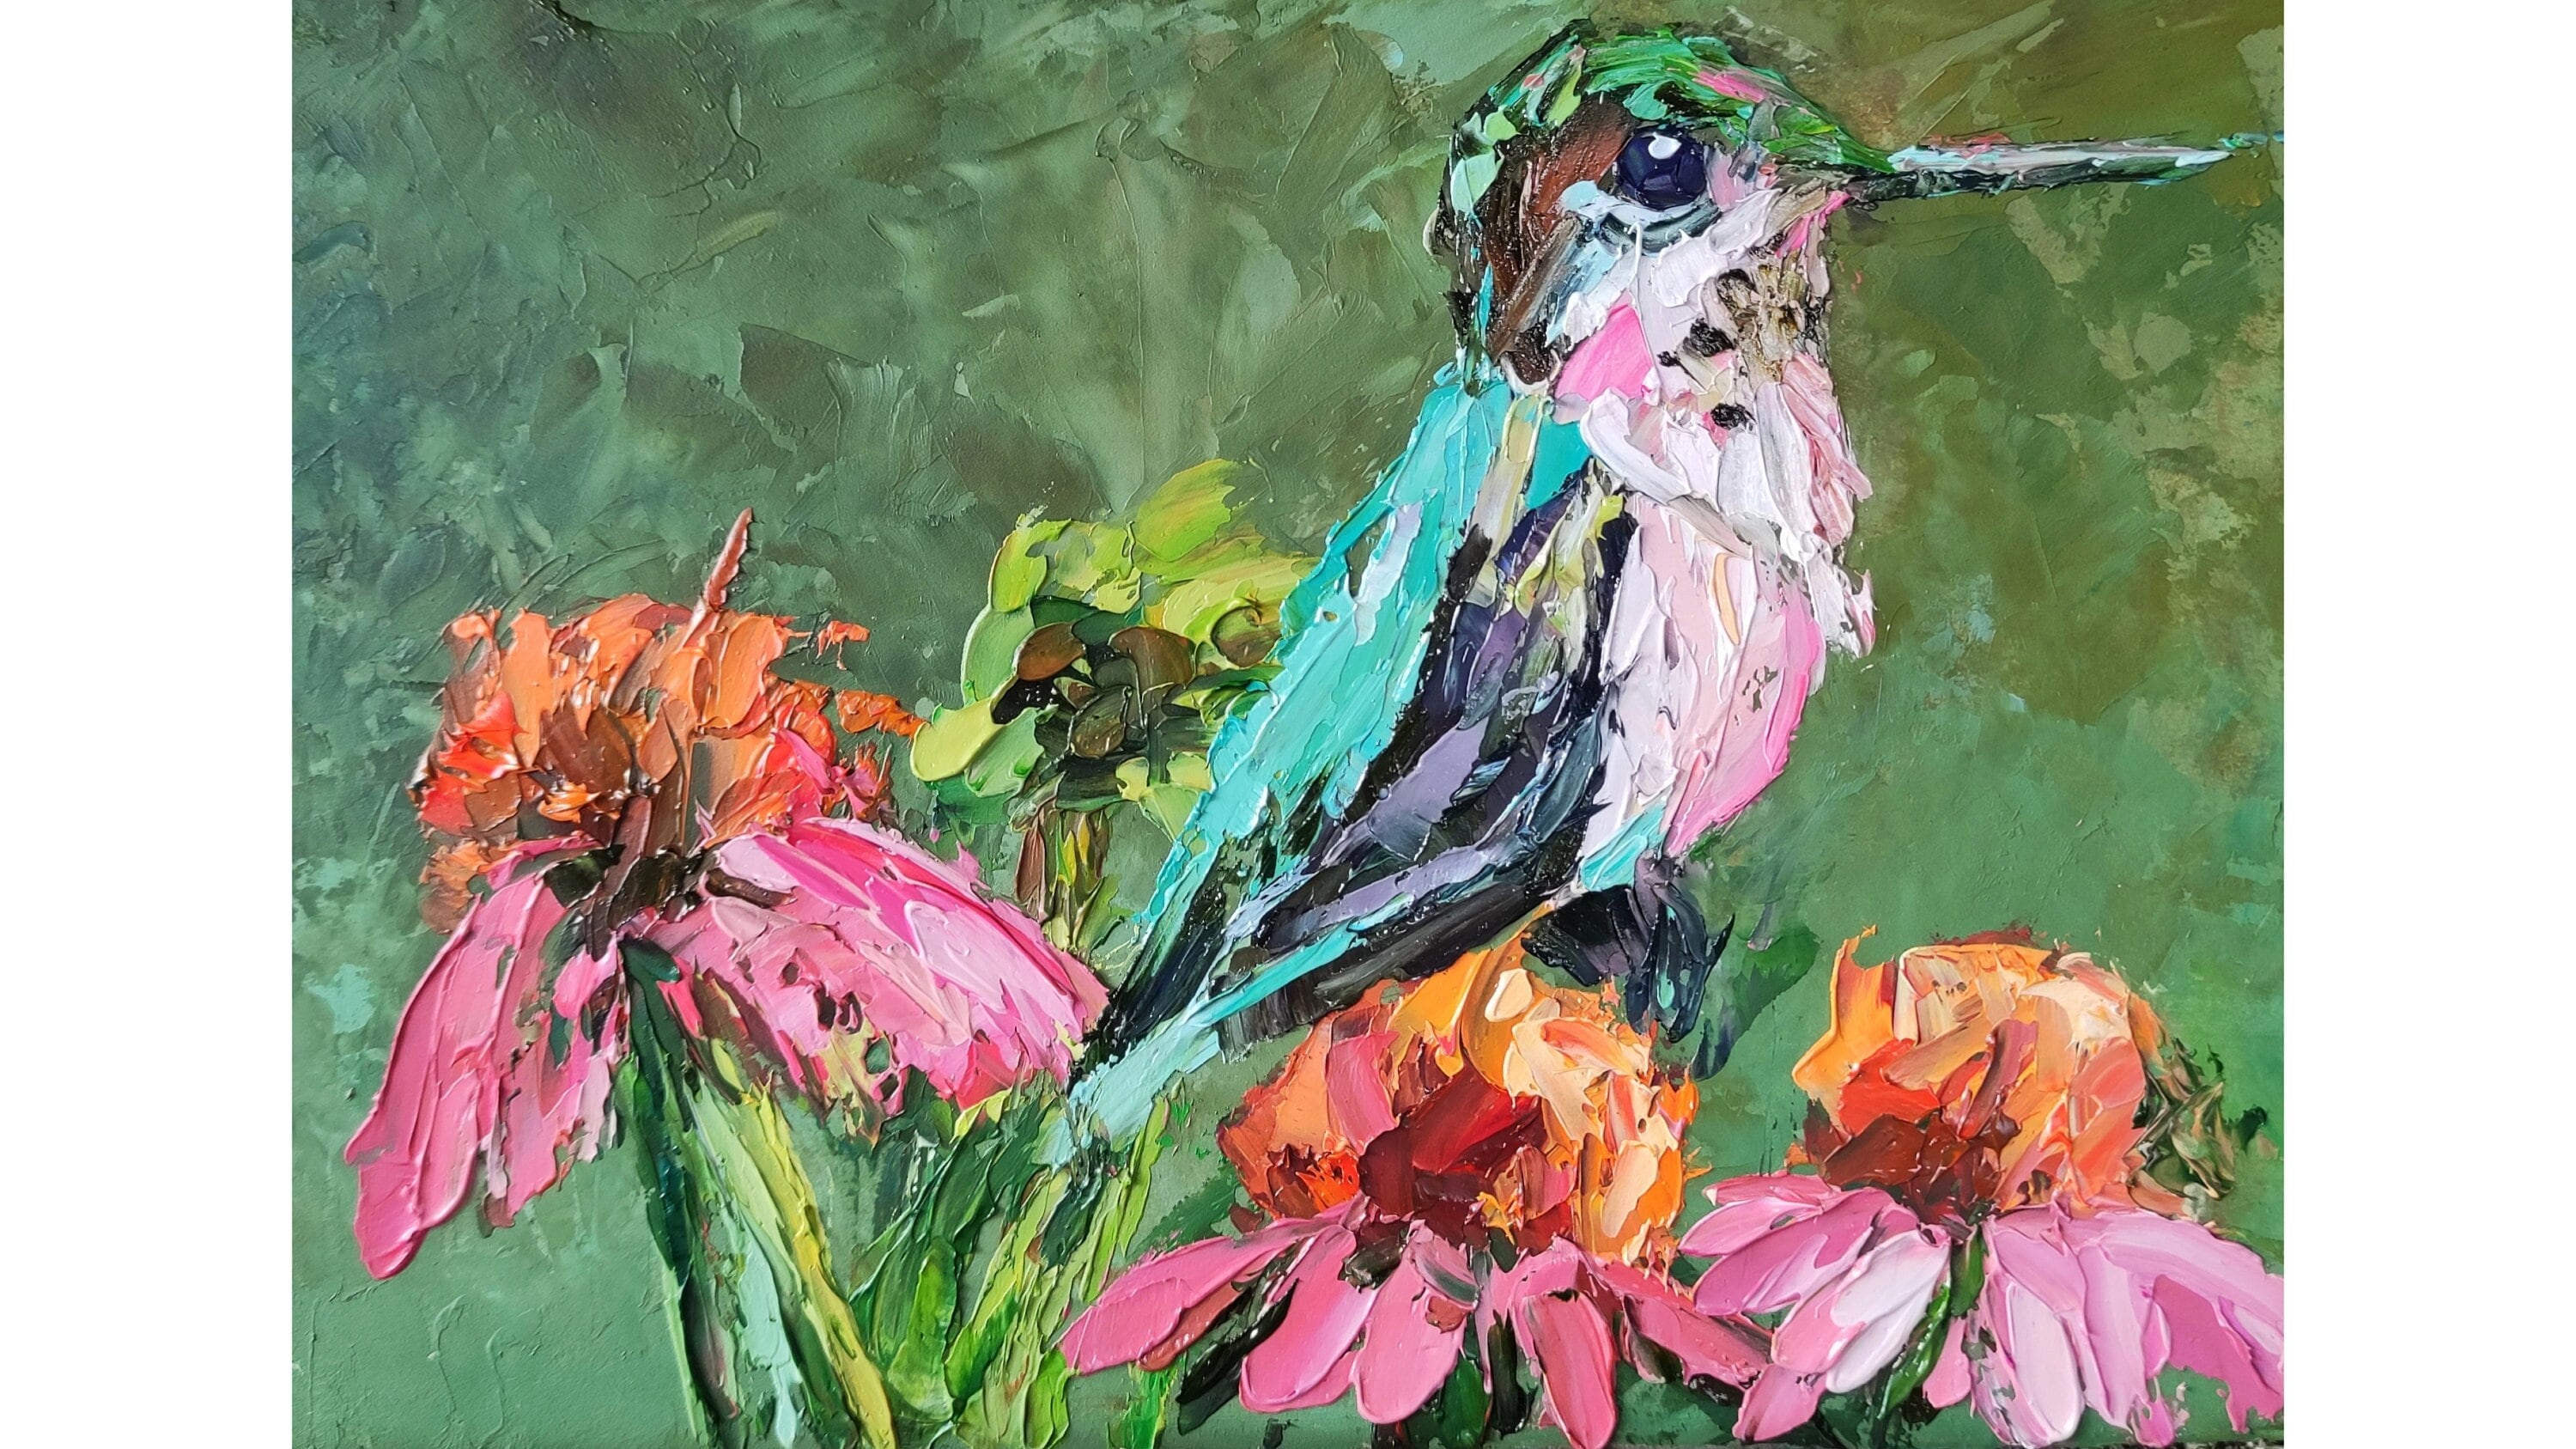 Flowers And Birds Painting